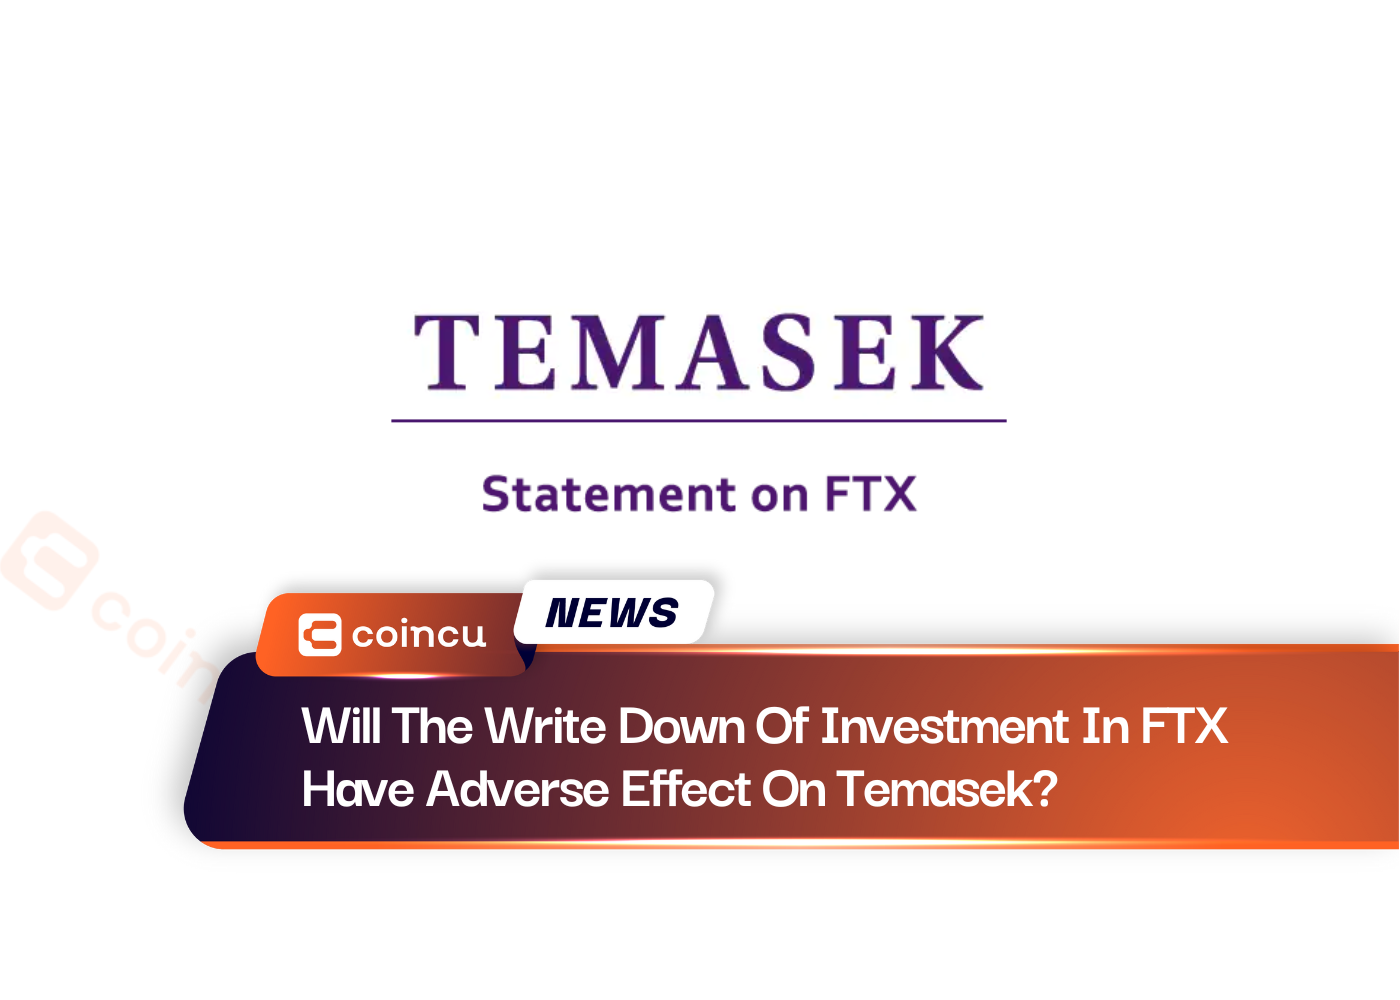 Will The Write Down Of Investment In FTX Have Adverse Effect On Temasek?